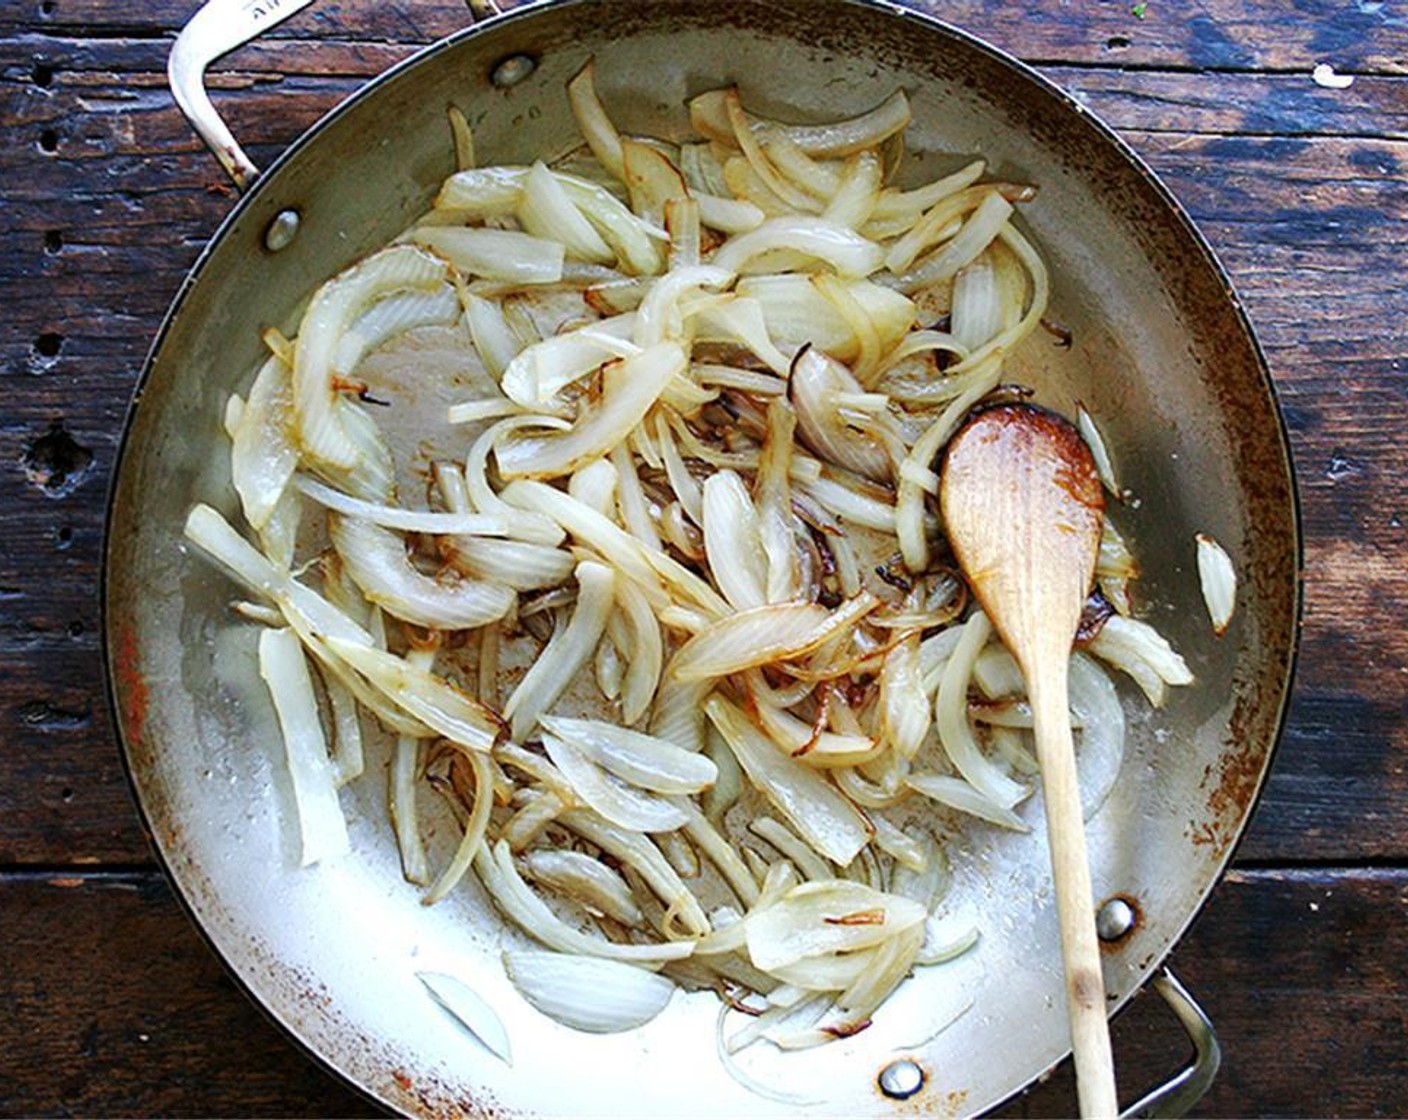 step 3 In a large sauté pan or pot, add the Olive Oil (2 Tbsp)  and place over medium heat. Add the sliced onion to the pan with a pinch of Kosher Salt (to taste) and sauté over medium heat until translucent or lightly brown, taking around about 5 minutes.